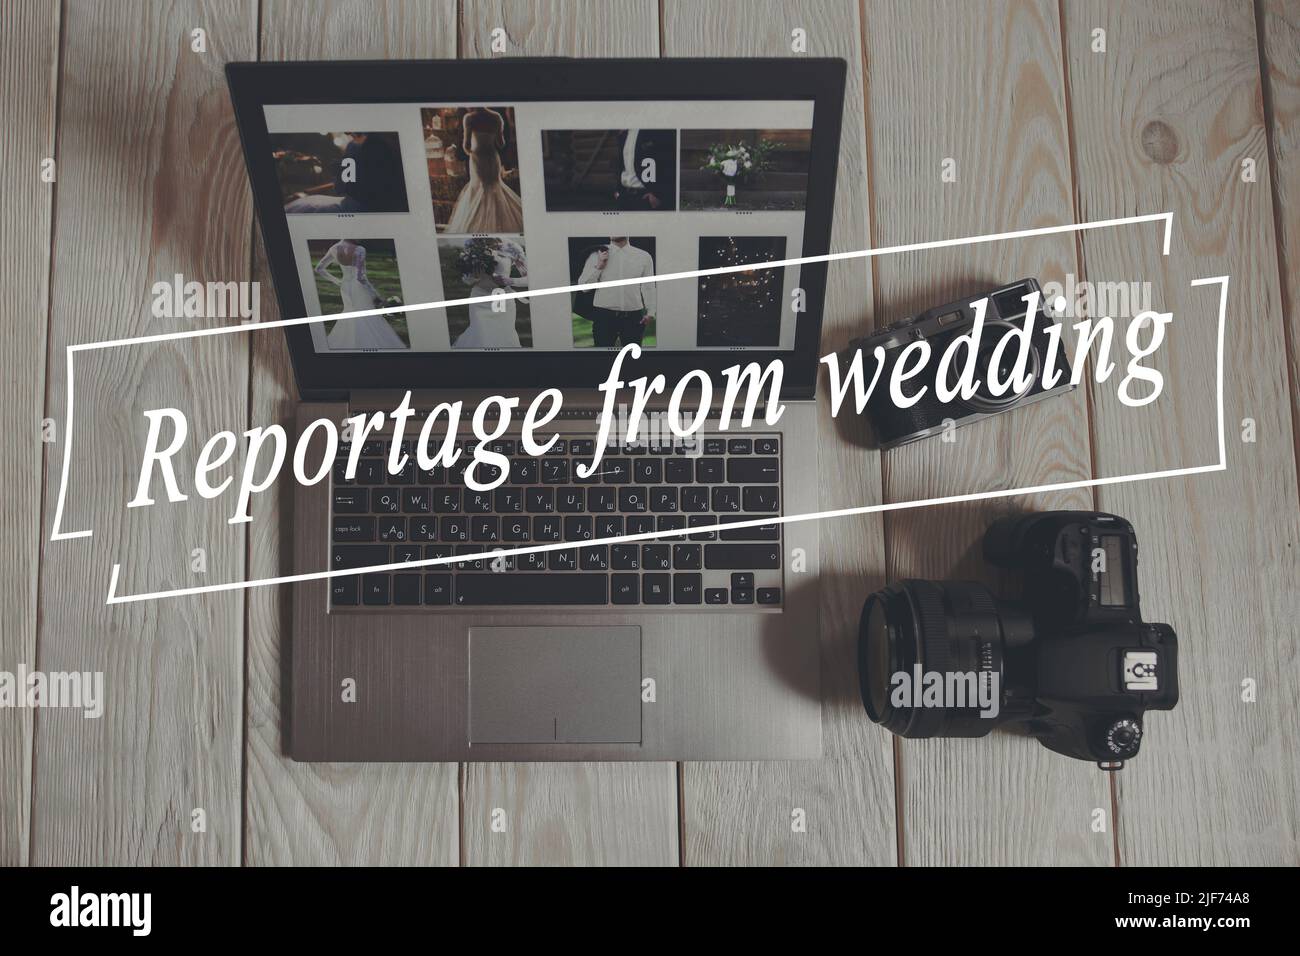 Reportage from wedding on laptop with cameras Stock Photo